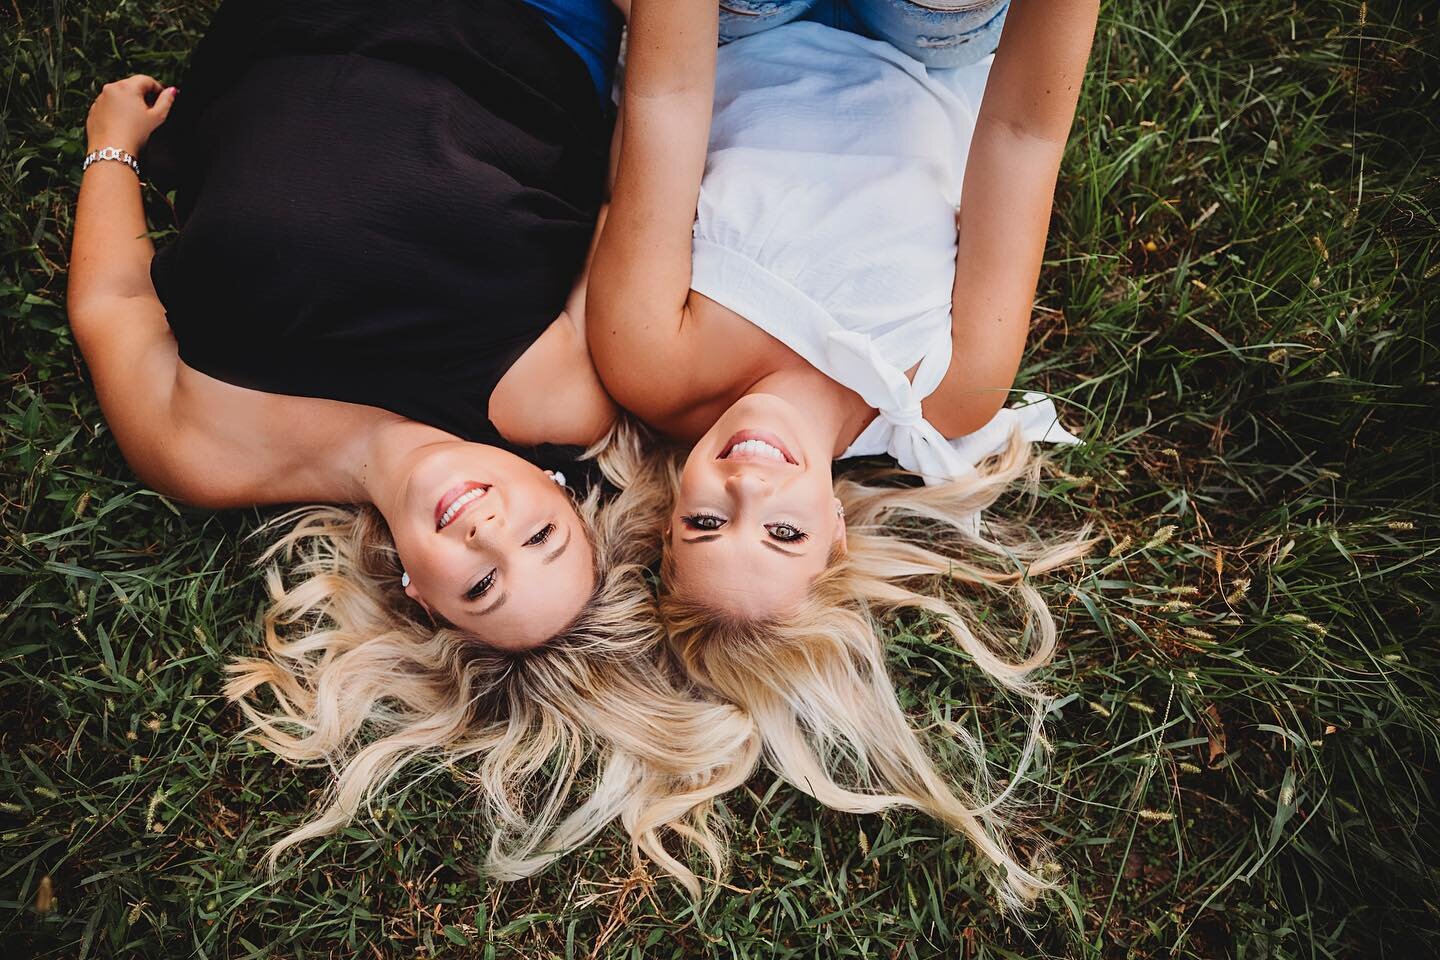 I am now a firm believer, that best friends (no matter what age) should have a session together! 🖤 I would LOVE to photograph an elderly bestie session too!  If you know someone, send them my way! 😎 #bestfriendgoals #bff #bestiesession